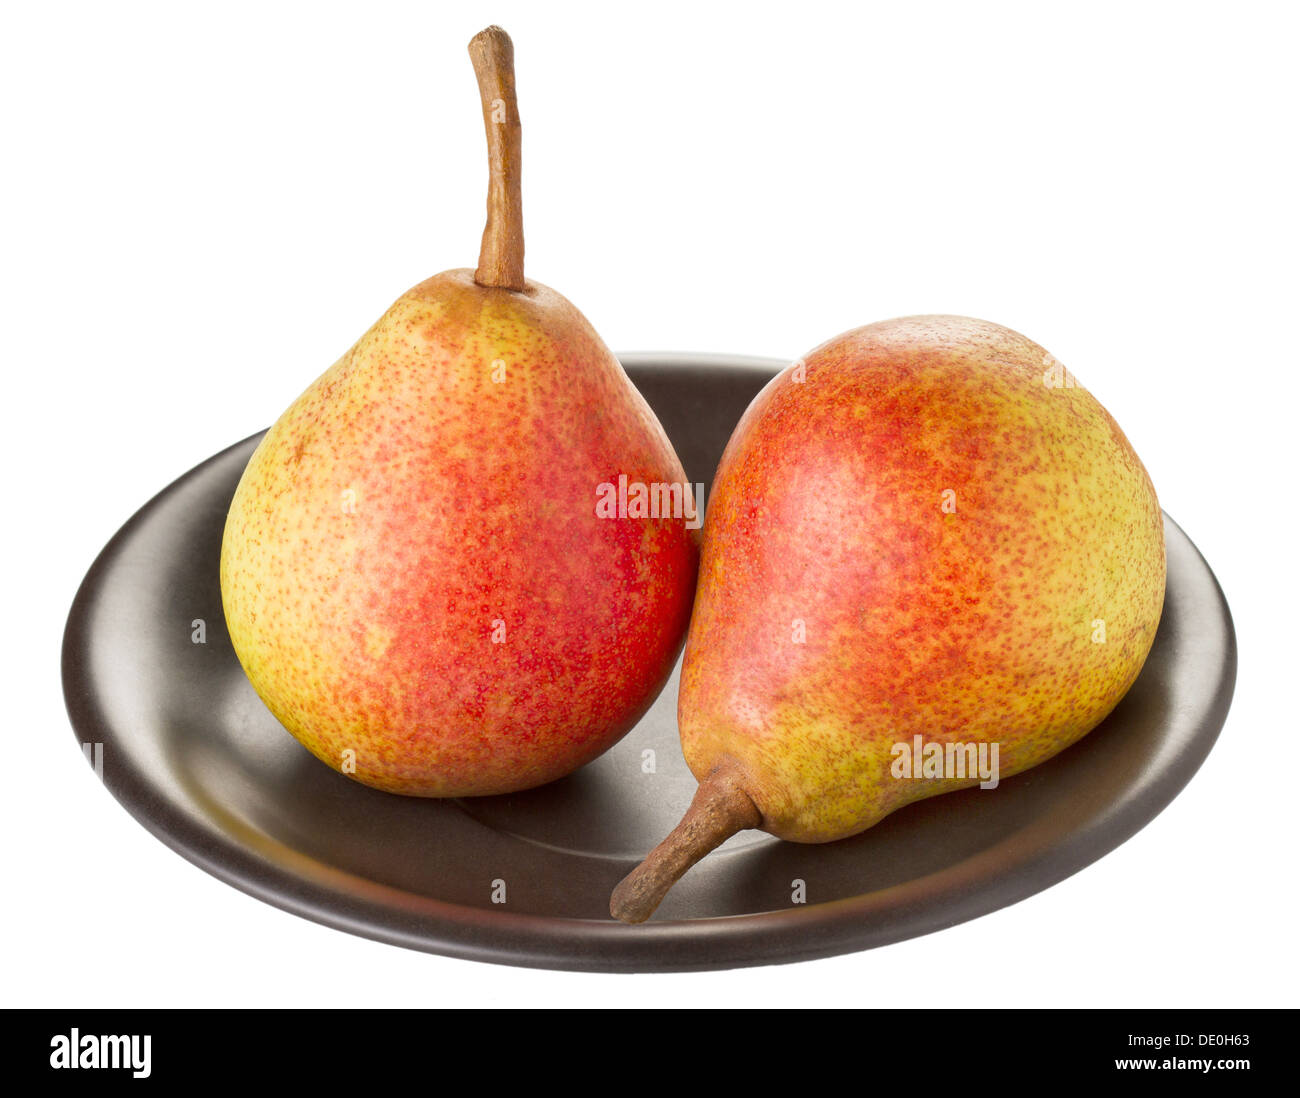 Two ripe pears on a black plate on a white background Stock Photo